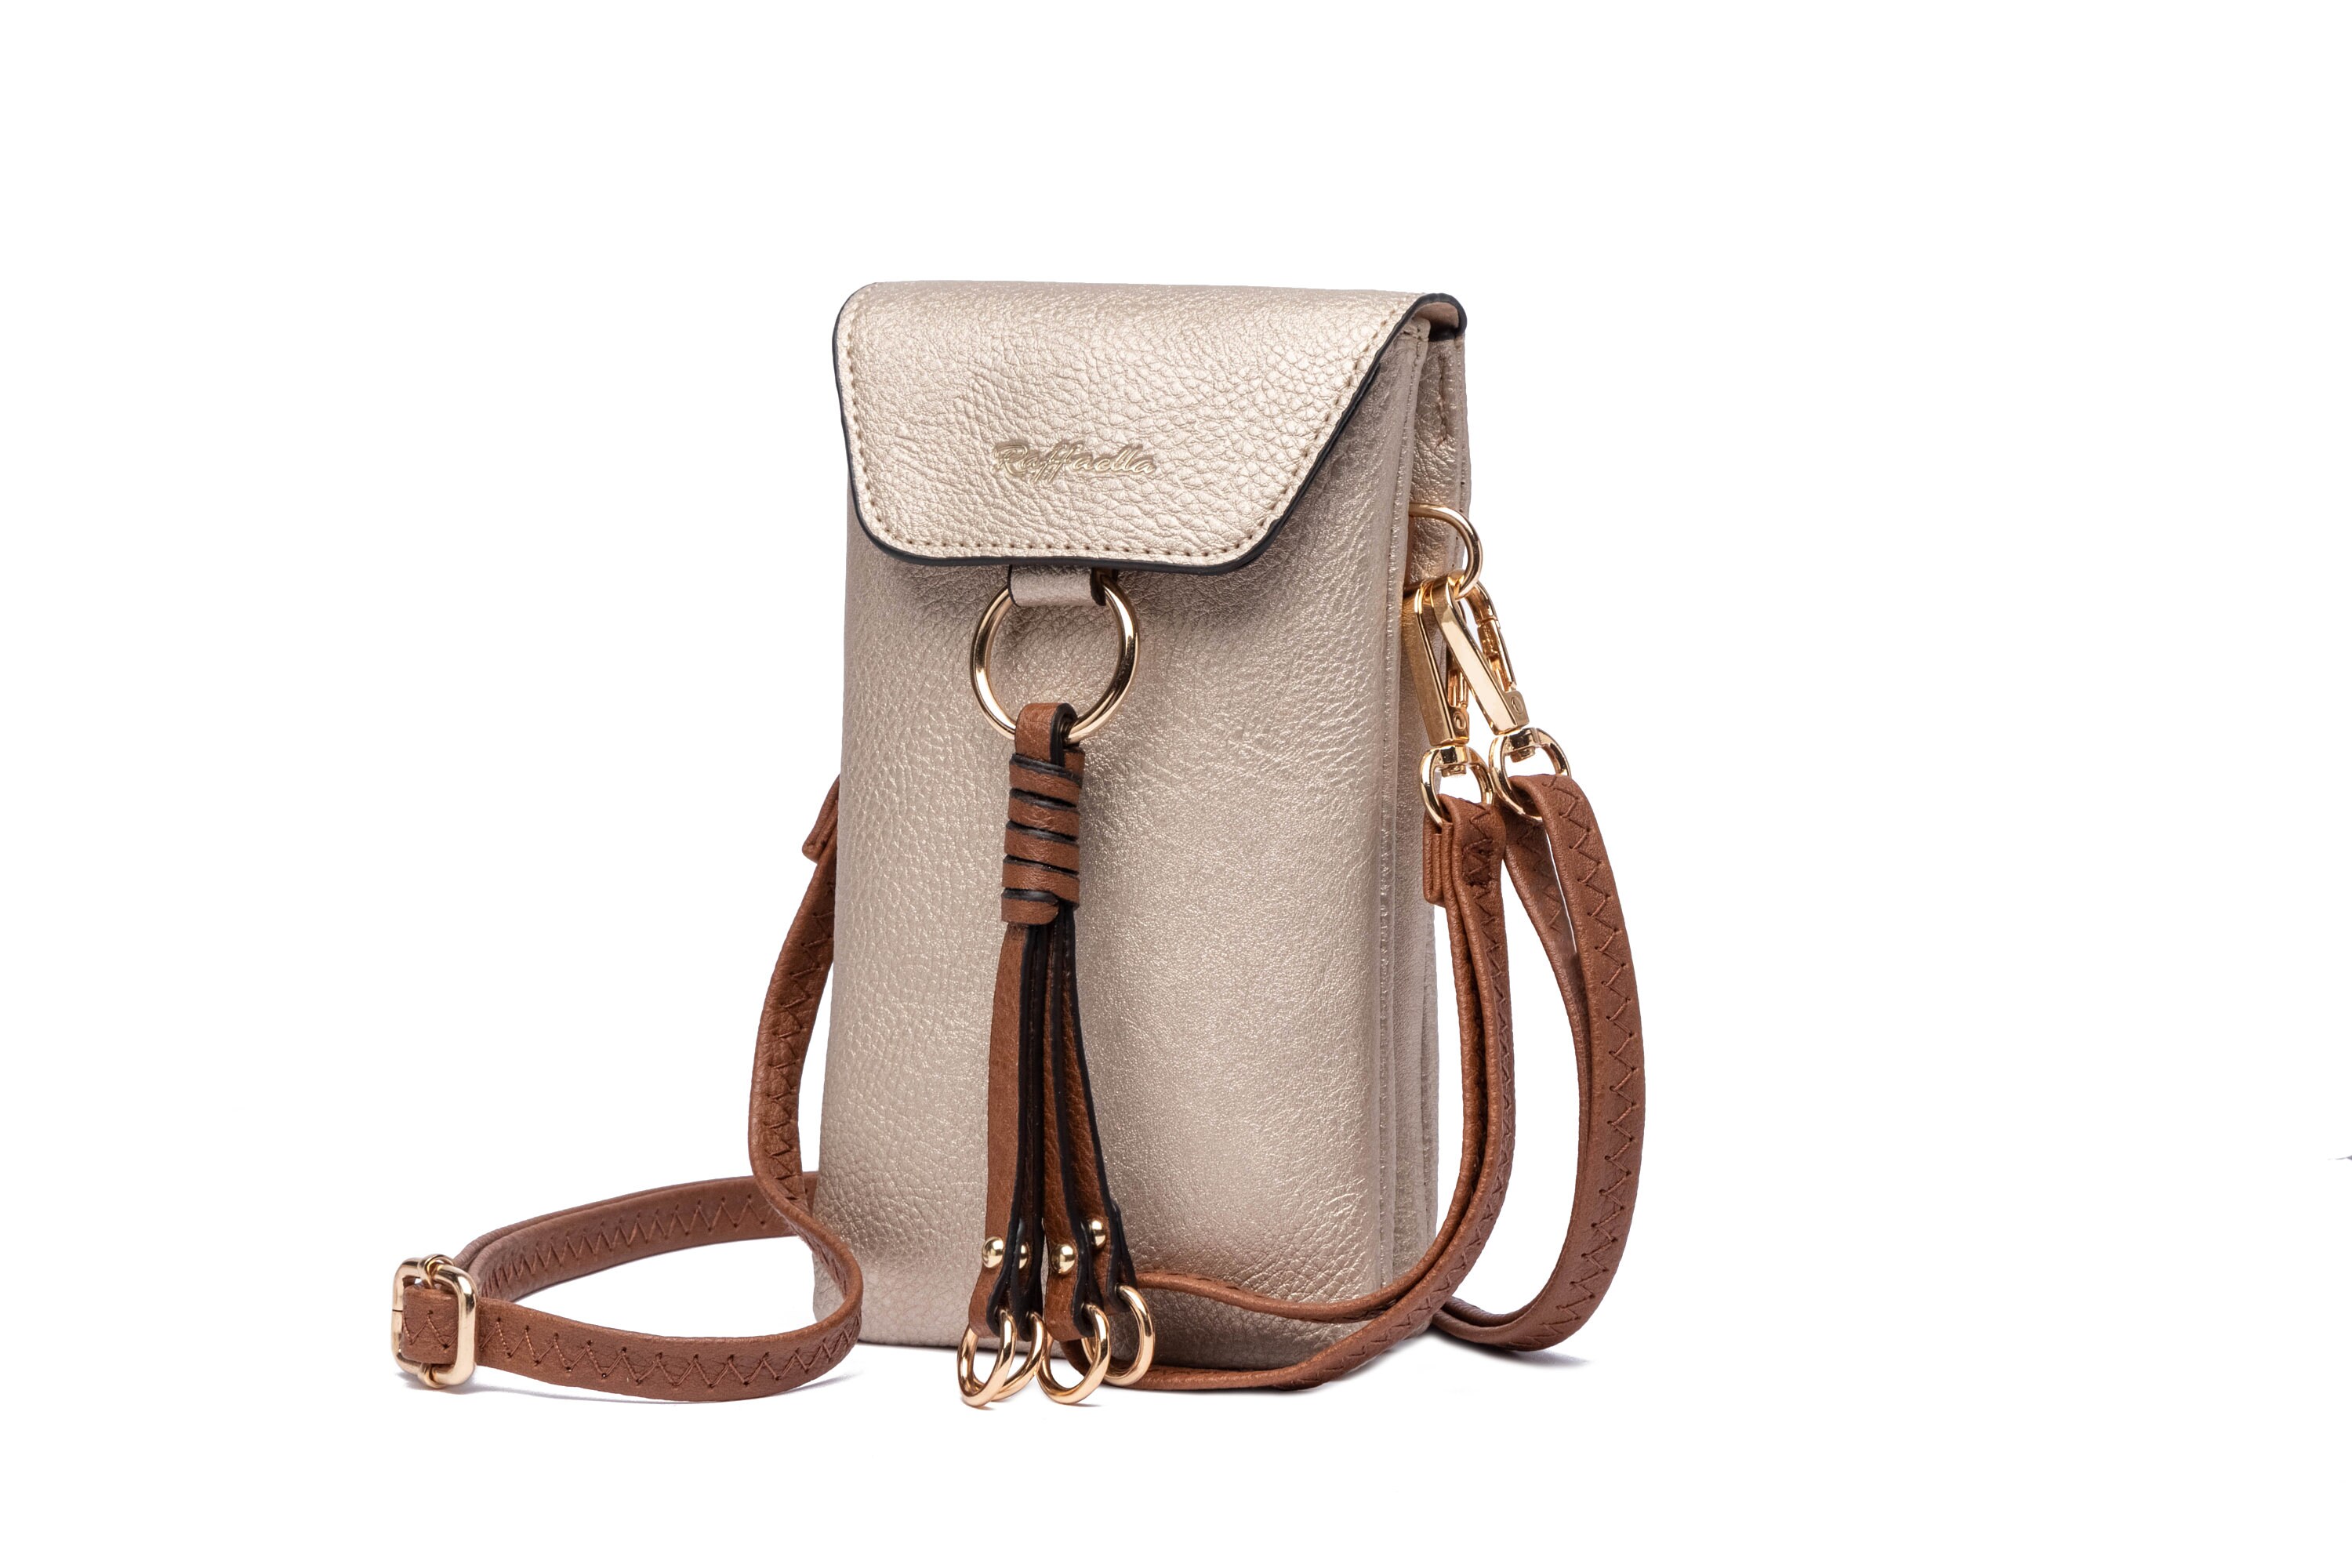 Small Crossbody Bags For Women, Stylish Cell Phone Purse, Luxury